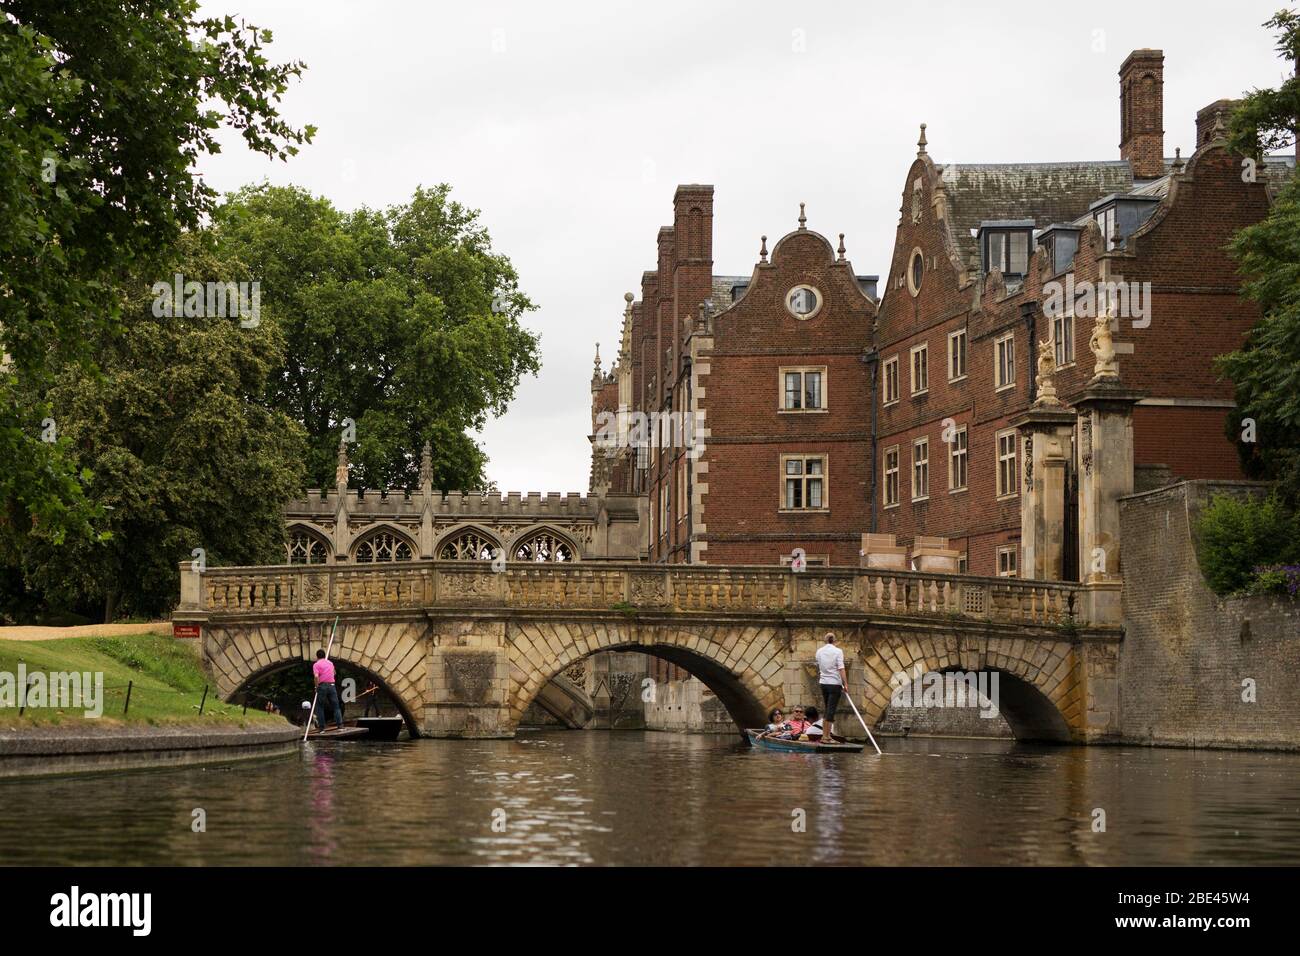 Punting on the Cam River by the Kitchen Bridge and the Bridge of Sighs at St John's College in Cambridge, England, United Kingdom. Stock Photo